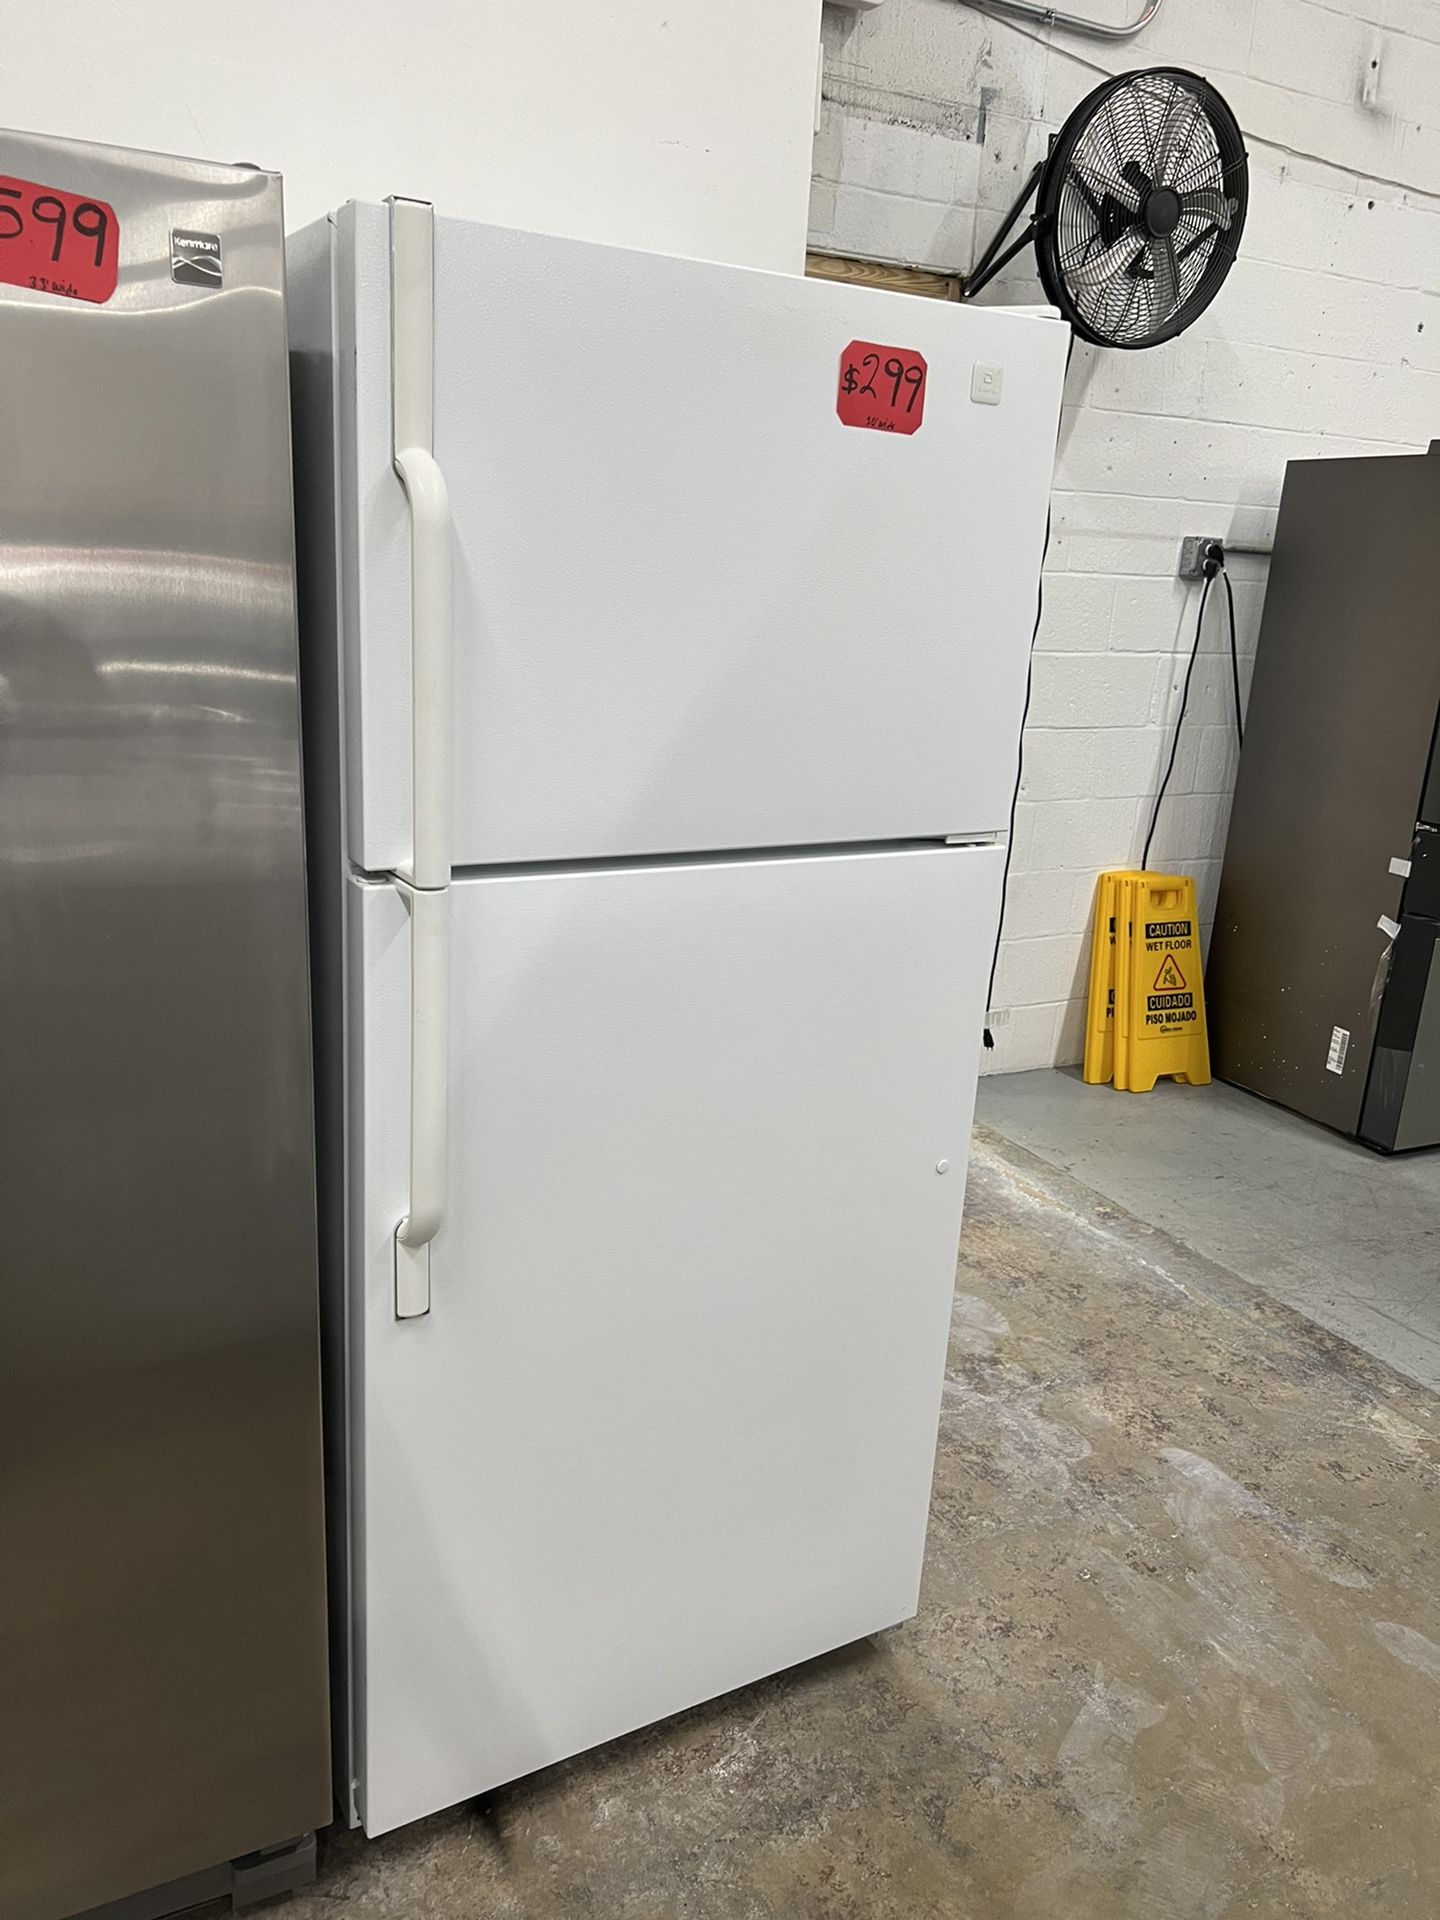 Maytag 30” Wide Top Freezer Refrigerator In Excellent Condition 